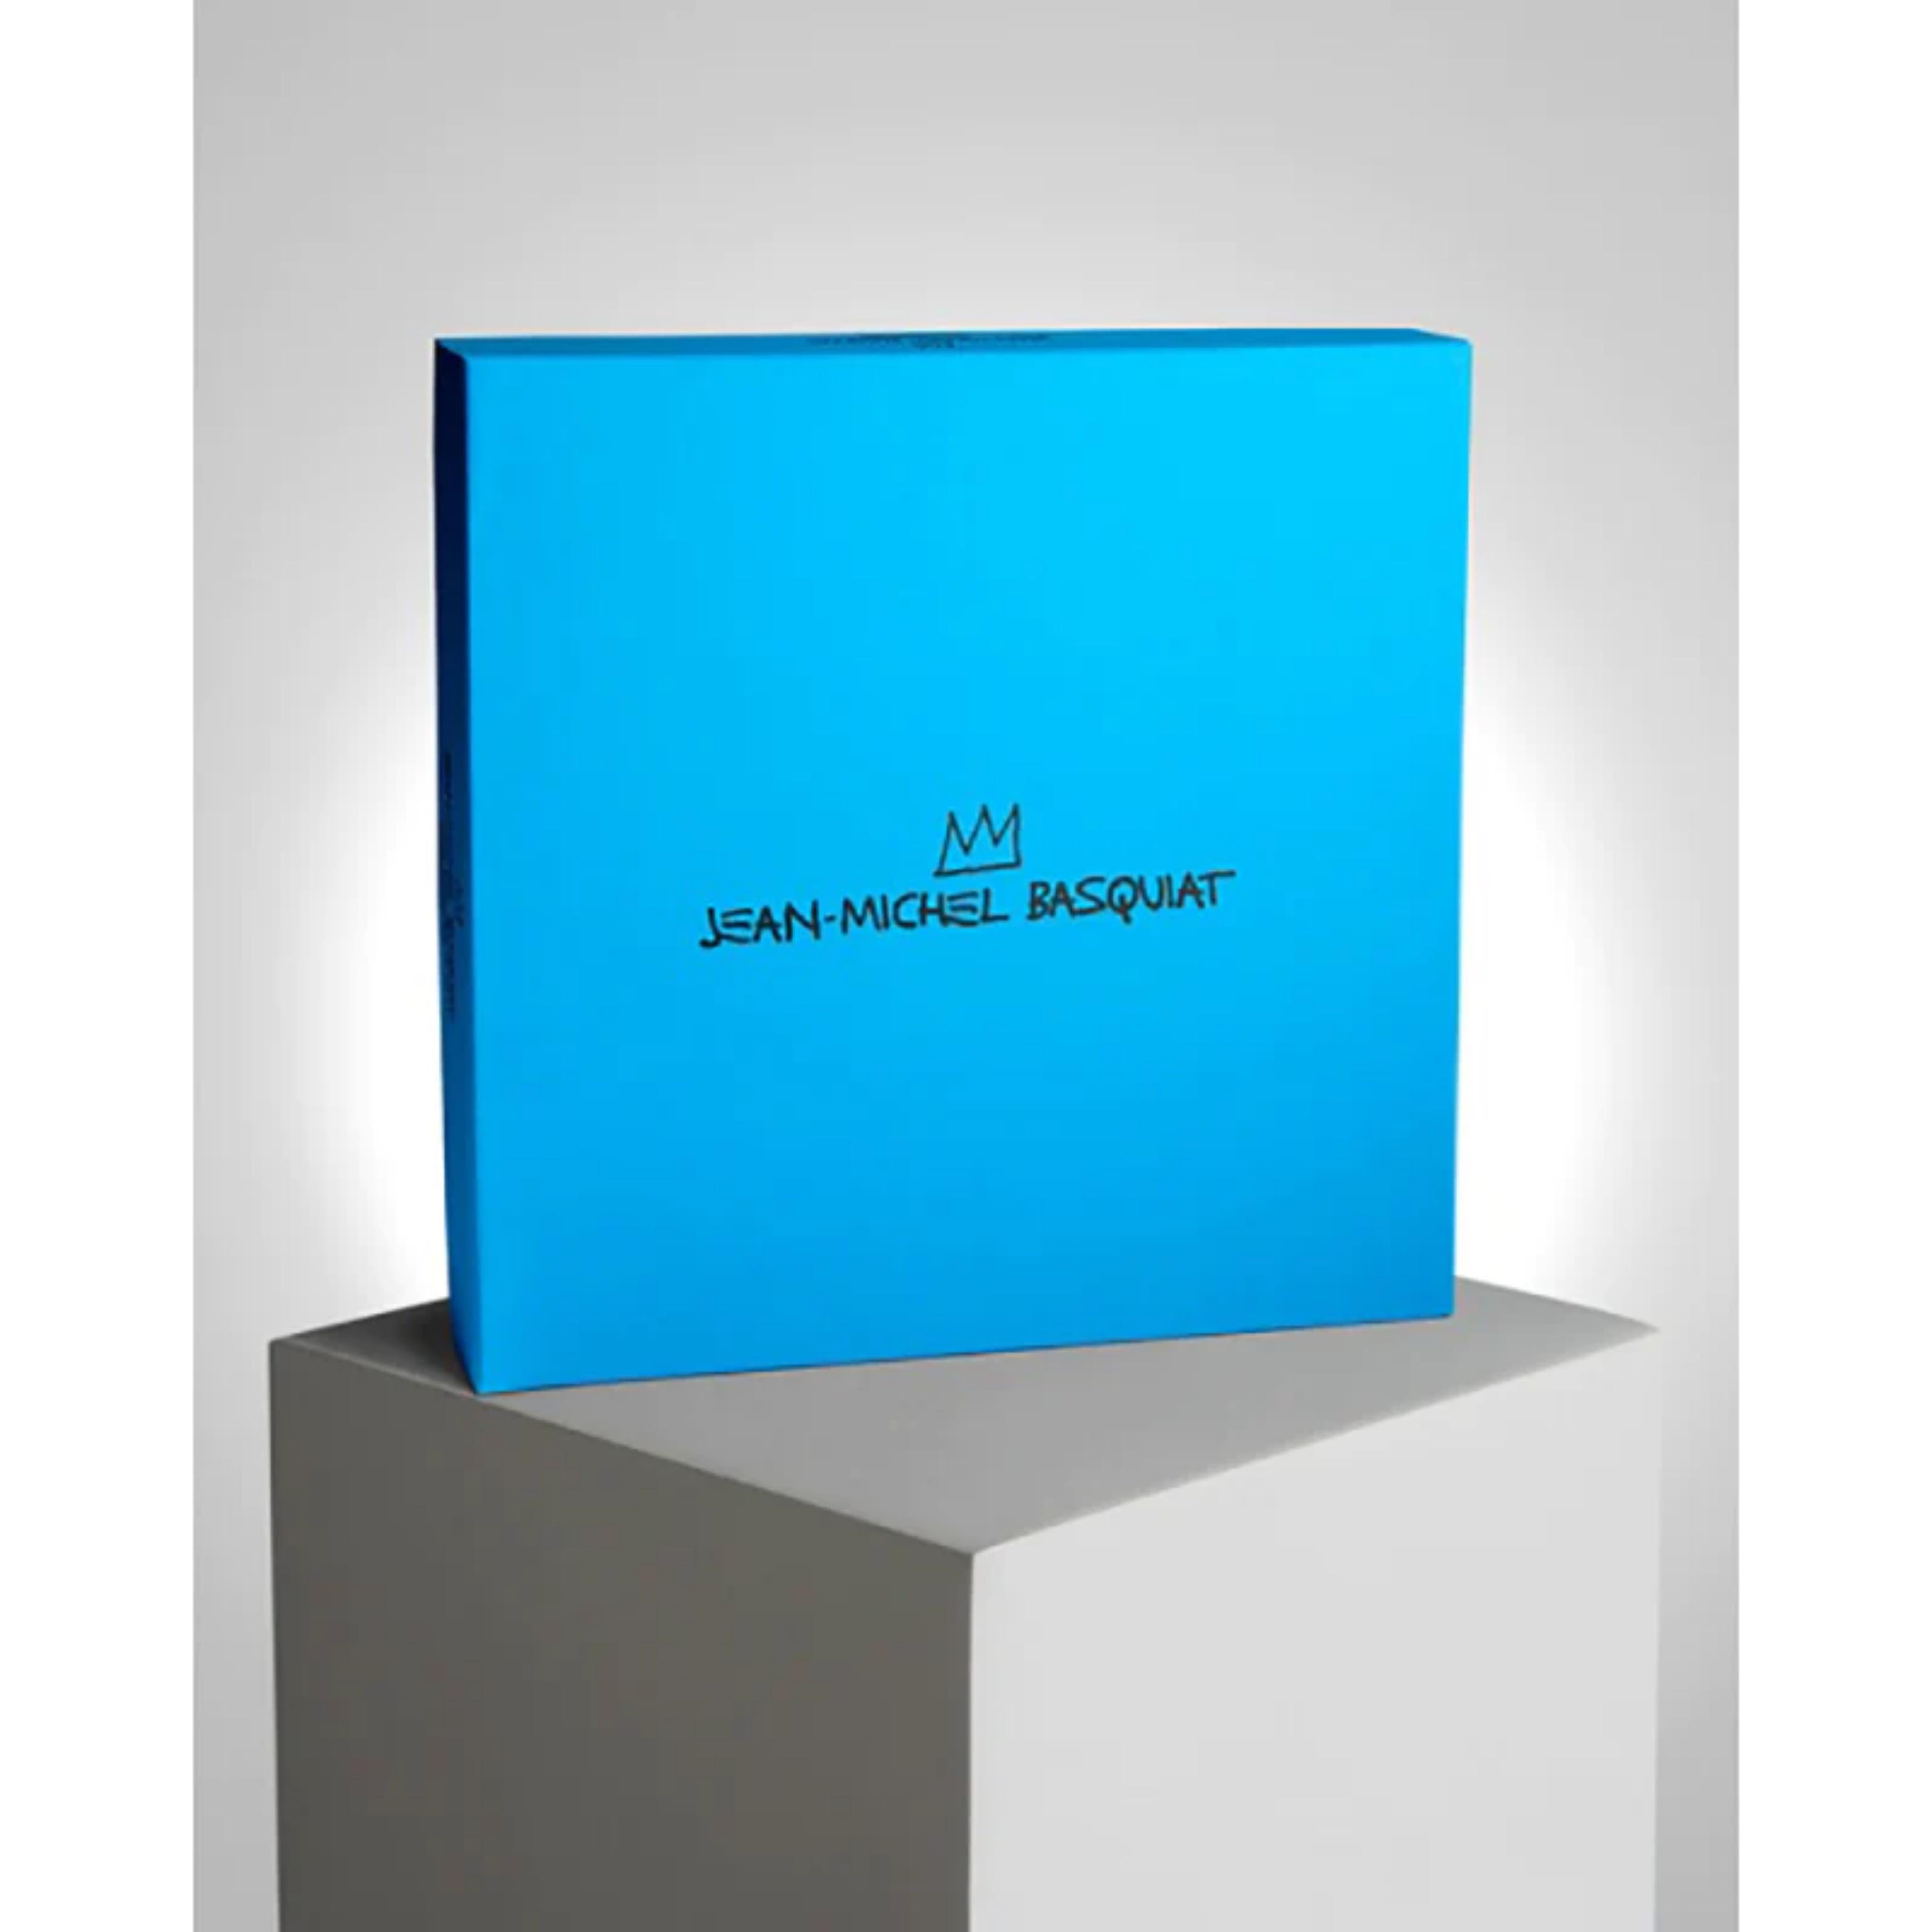 Limoges x Estate of Jean-Michel Basquiat
Estate Authorized Porcelain Plate in Box, 2014
Porcelain Plate in Blue Presentation Box with Estate Logo
This plate is in excellent condition and comes in an elegant blue gift box bearing the estate copyright